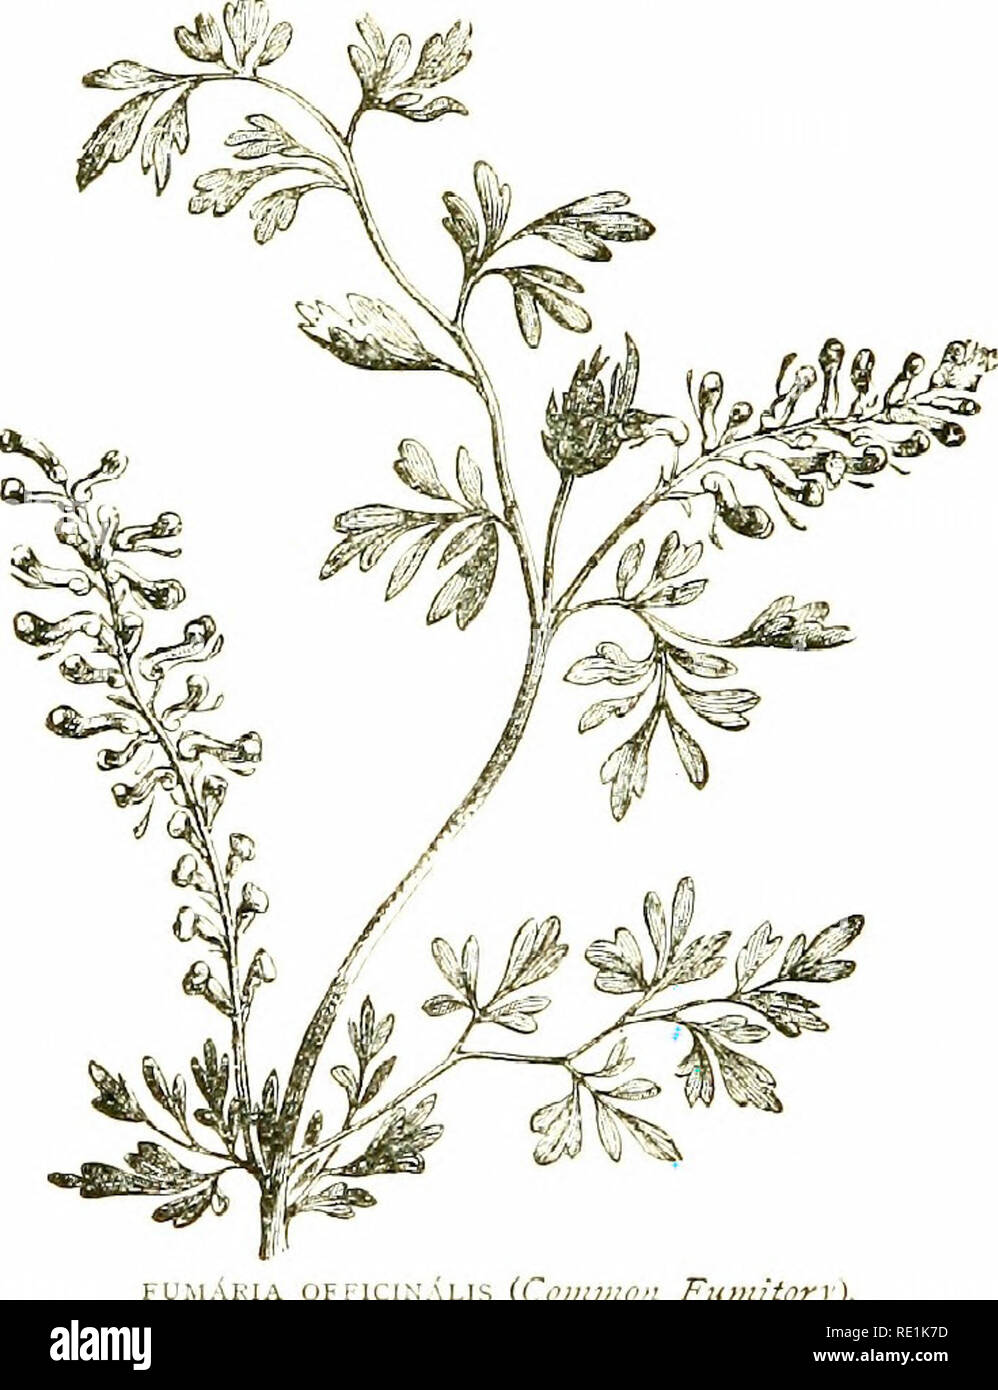 . Flowers of the field. Botany. 30 FUMARIACE.'E 1. CoRYDALis.—Fniit a compressed^ 2-valved, many-seeded capsule. 2. FuMARiA.—Fruit a globose, indeliiscent, i-seeded achene. I. CouvoALis (Corydalis).—Herbs with much-divided glabrous /c(?ir,s and bracteate racemes of small raonosymmetric/t^avr^.- Zt'/rtA-connivent ; the upper one spurred; cuj i^oUi mmiy-seeded.. FU.MAKIA QFFIC s {Ci'iimwn Fitniitorr). (The Greek name Corydalis «as emplo)ed for this or some allied plant by Galen.) I, C. liaviculdl.i (Climbing Cordalis).—Stem slender, climb- ing ; leaves glaucous, pinnate, endmg in branched tendr Stock Photo